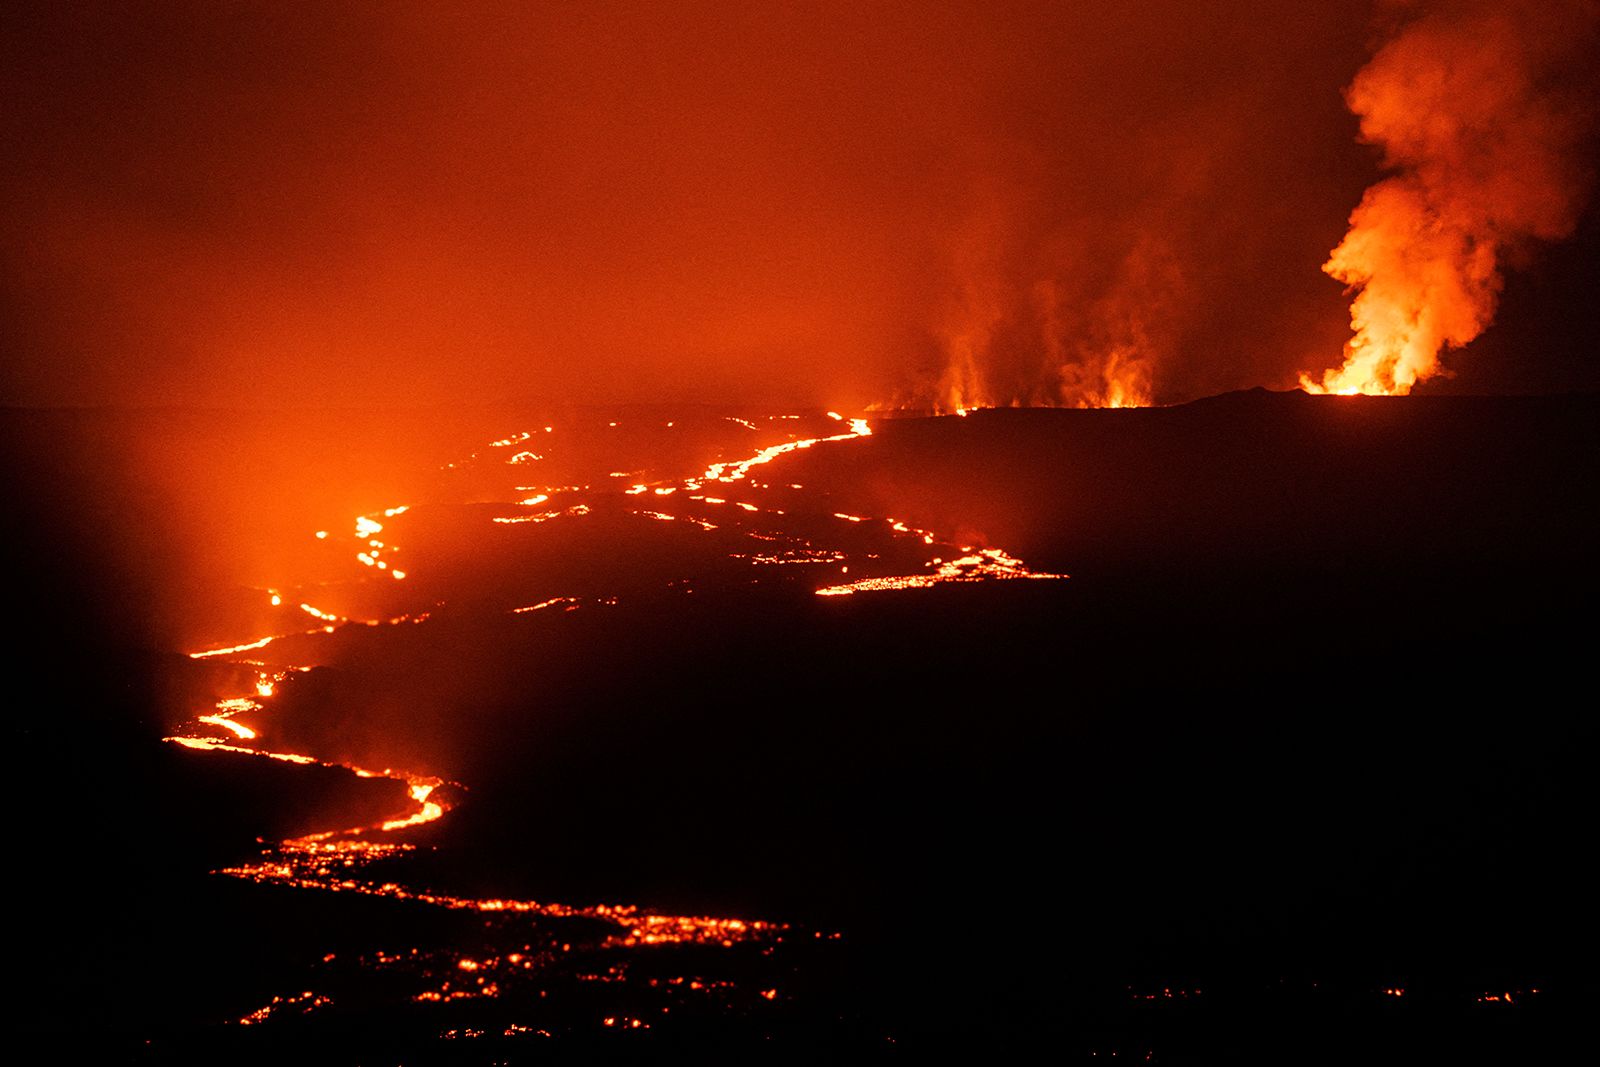 Mauna Loa: As scientists in Hawaii carefully monitor the risks of